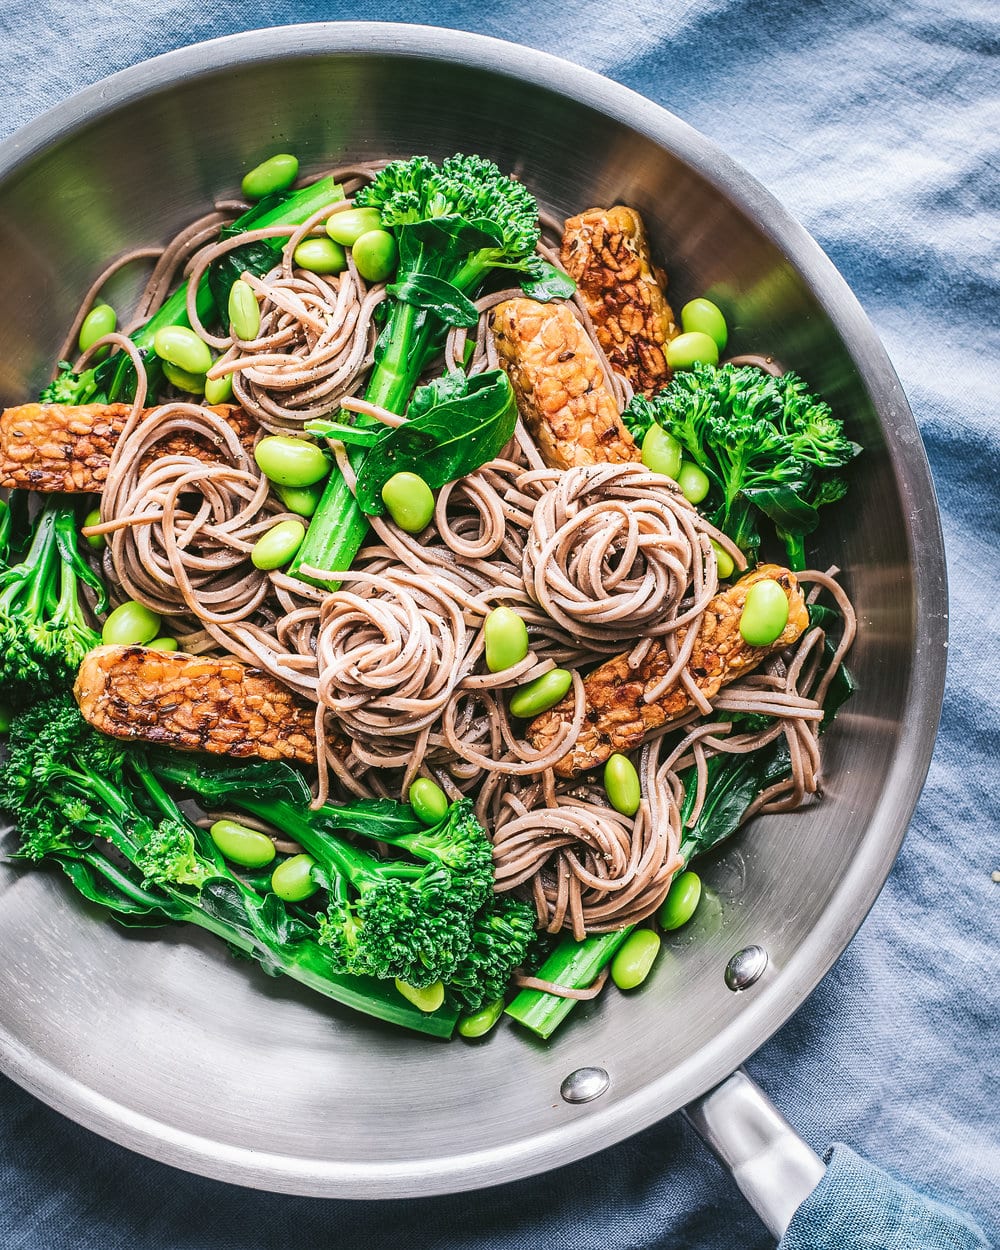 Tempeh, edamame, noodles and broccolini in a large frying pan on a blue table cloth.